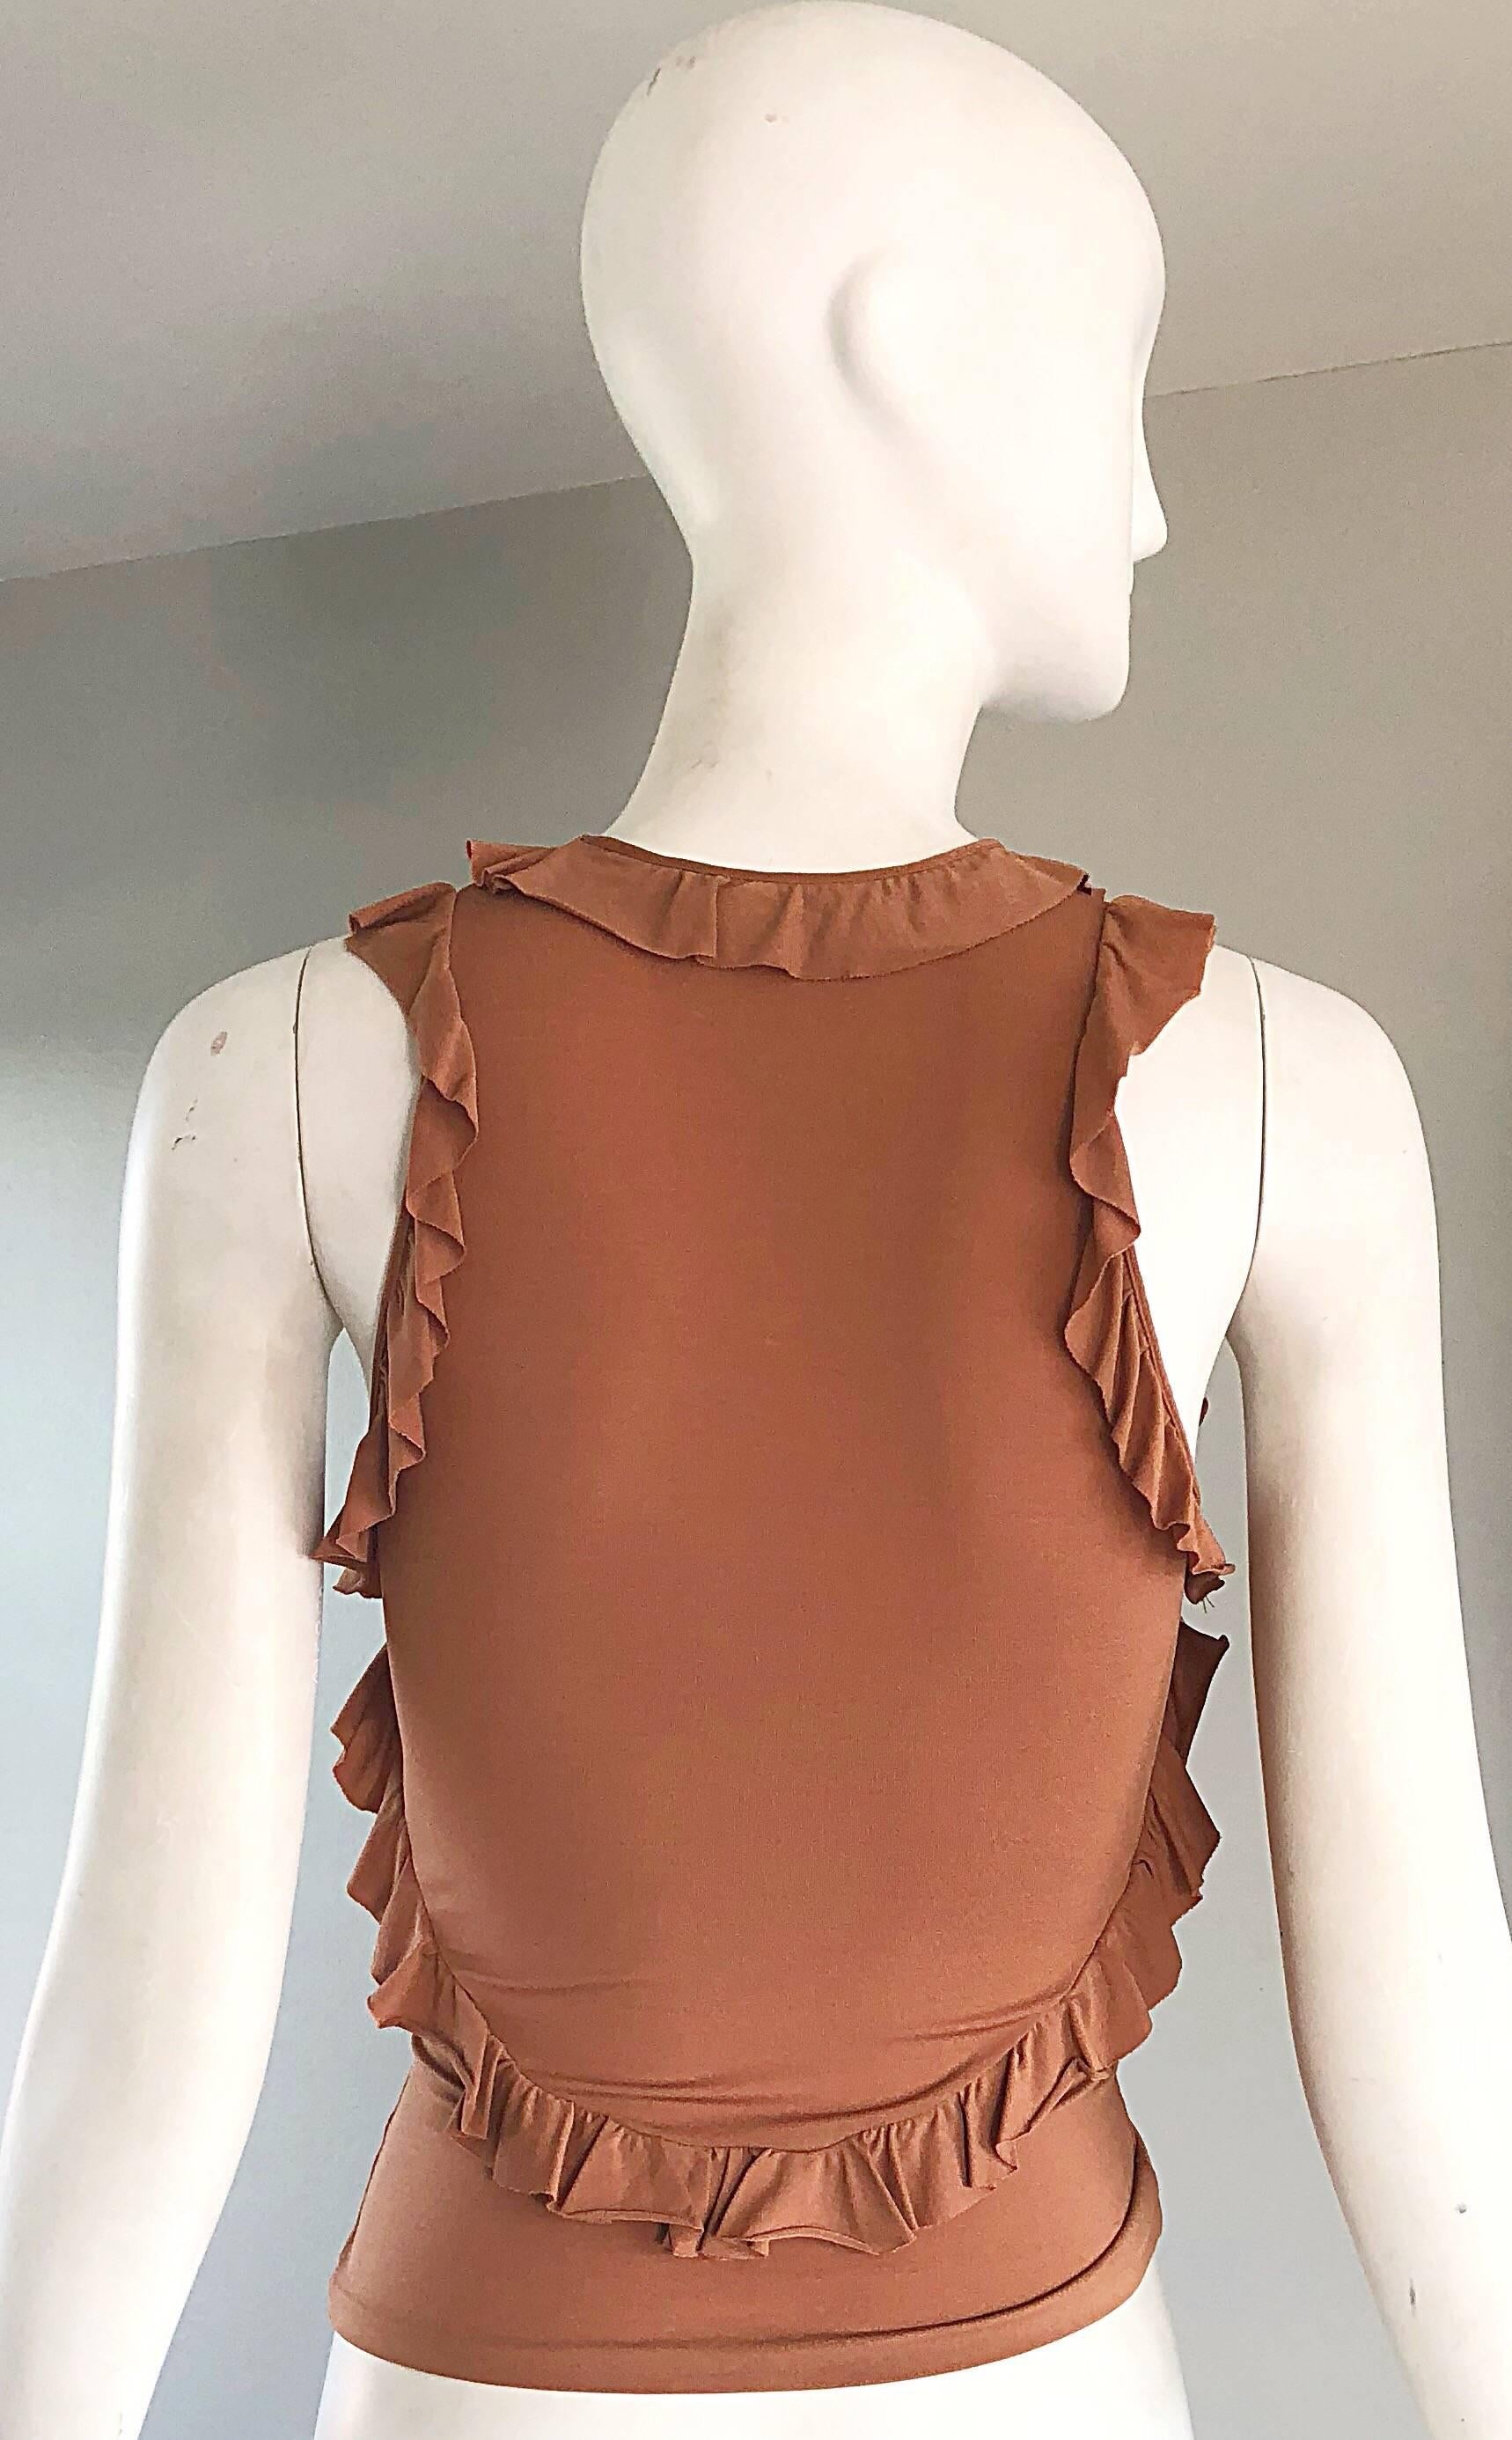 Tom Ford for Yves Saint Laurent Terra Cotta Tan Jersey Ruffle Sleeveless Blouse In Excellent Condition For Sale In San Diego, CA